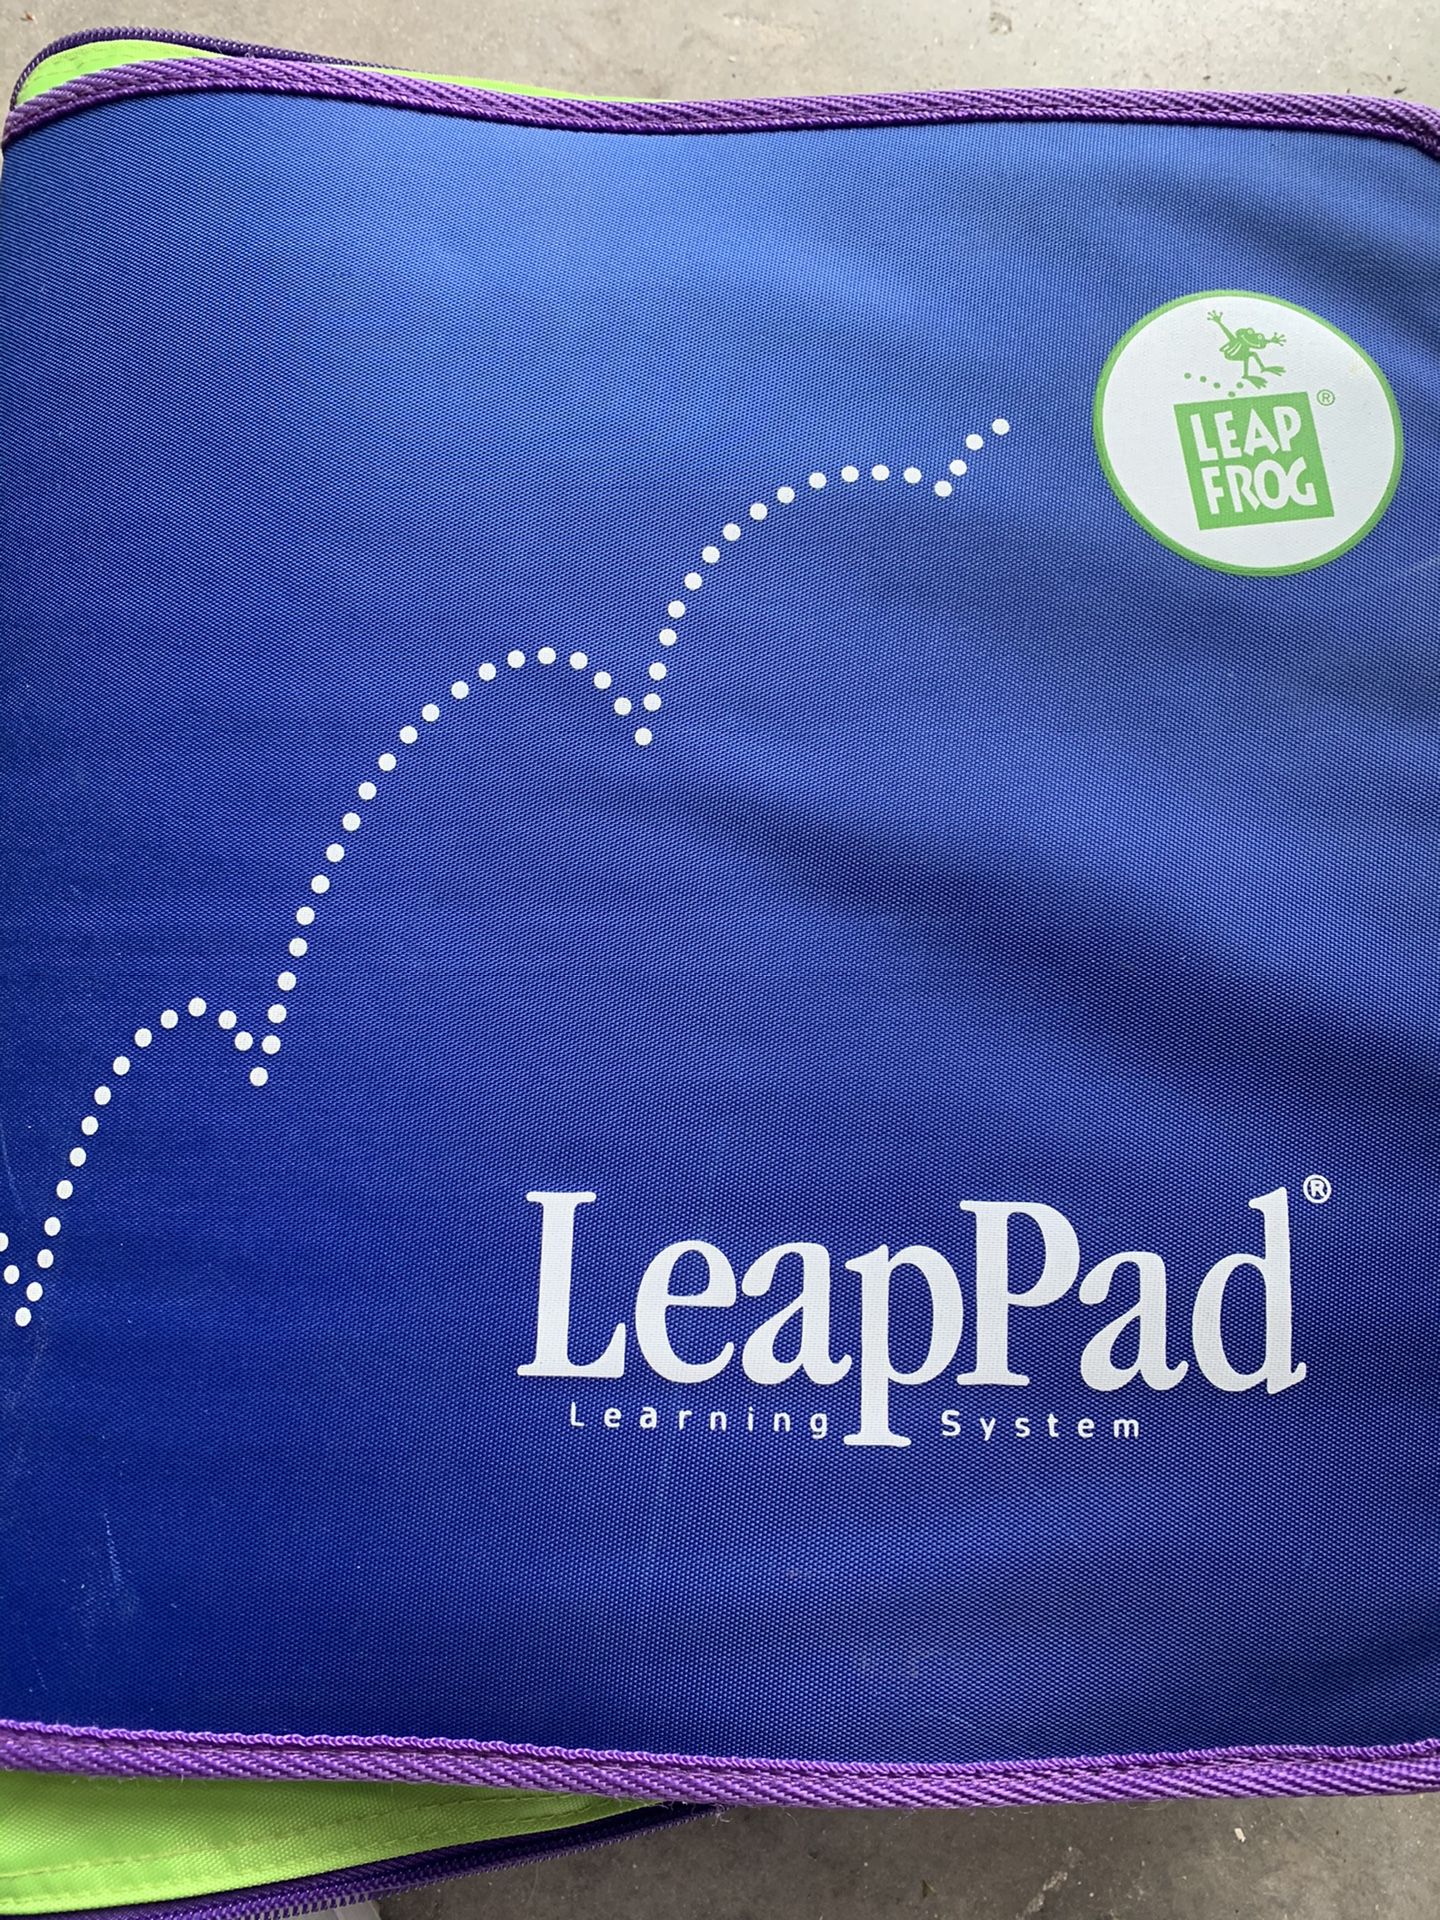 Leapfrog LeapPad. Good condition. Still works like new. 16games and 14 books